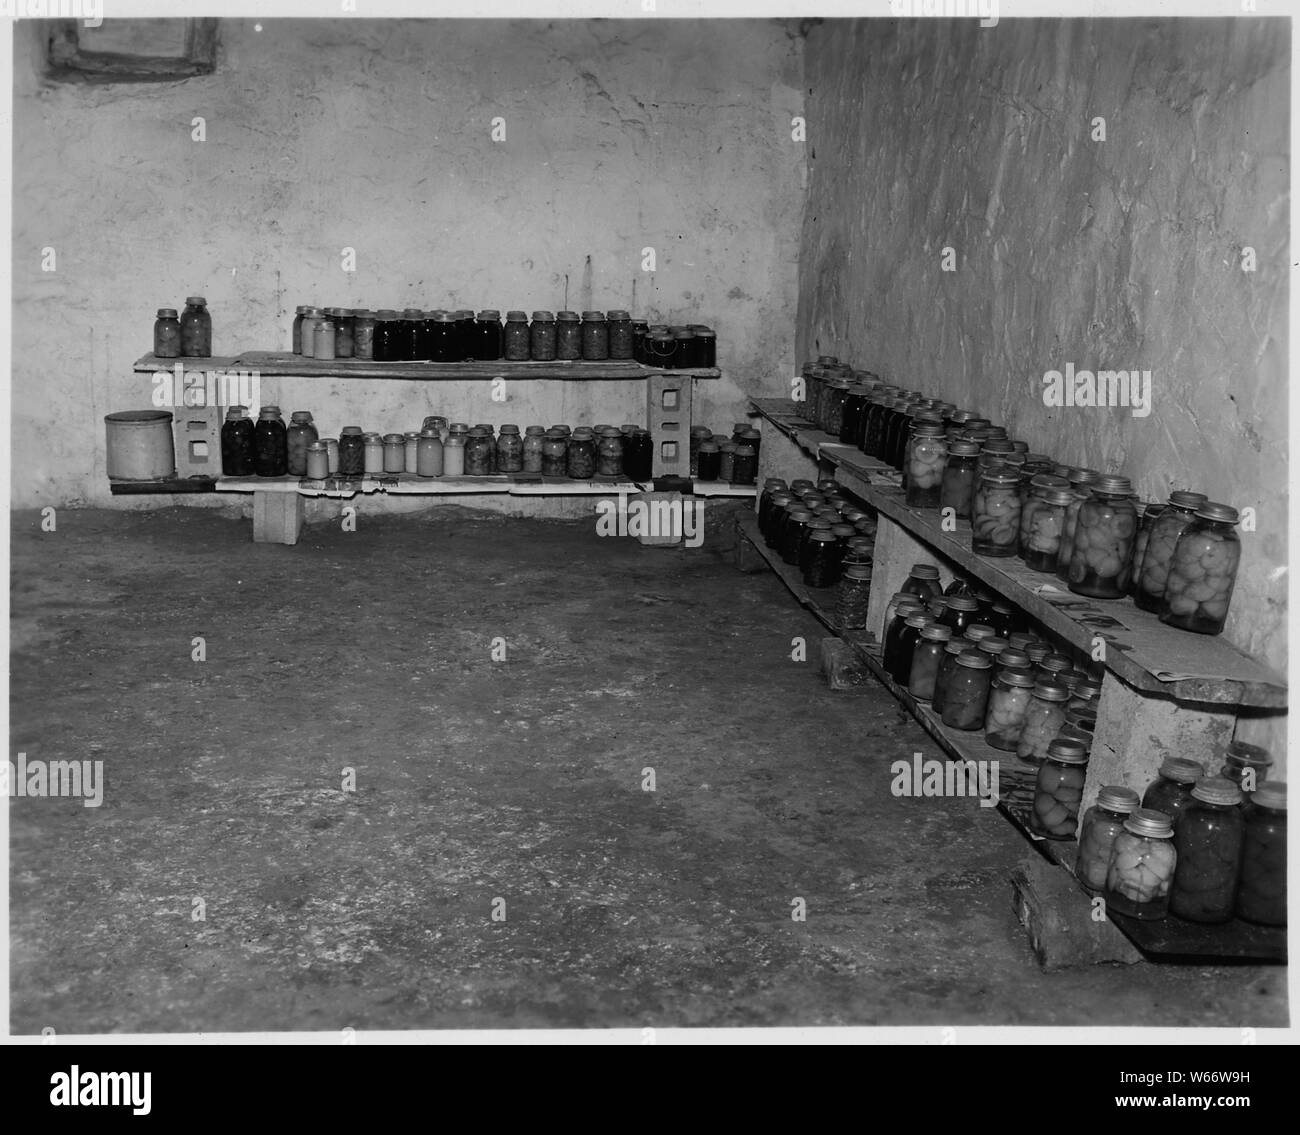 Lancaster County, Pennsylvania. Home-canned foods are still popular in the Amish country. Eight hu . . .; Scope and content:  Full caption reads as follows: Lancaster County, Pennsylvania. Home-canned foods are still popular in the Amish country. Eight hundred quarts of food were stored in this cellar last fall. The white-washed walls are typiCalifornia. Stock Photo